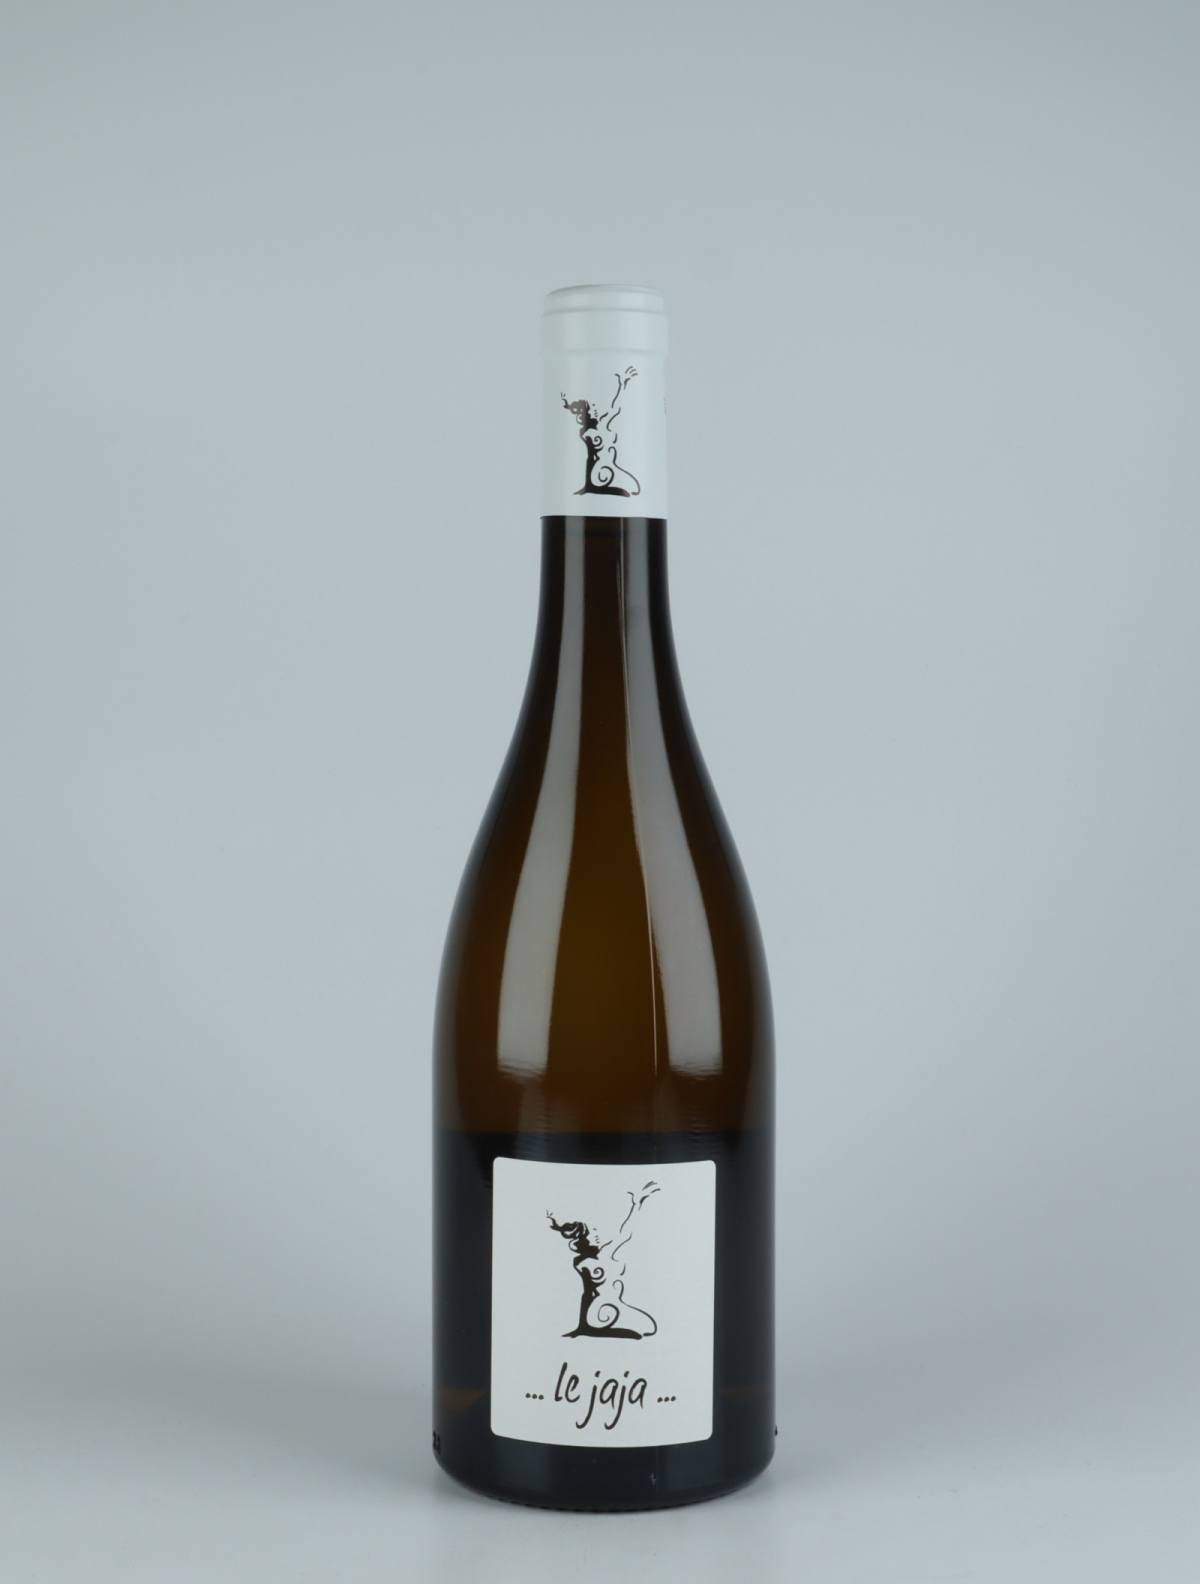 A bottle 2020 Chignin - Le Jaja White wine from Gilles Berlioz, Savoie in France